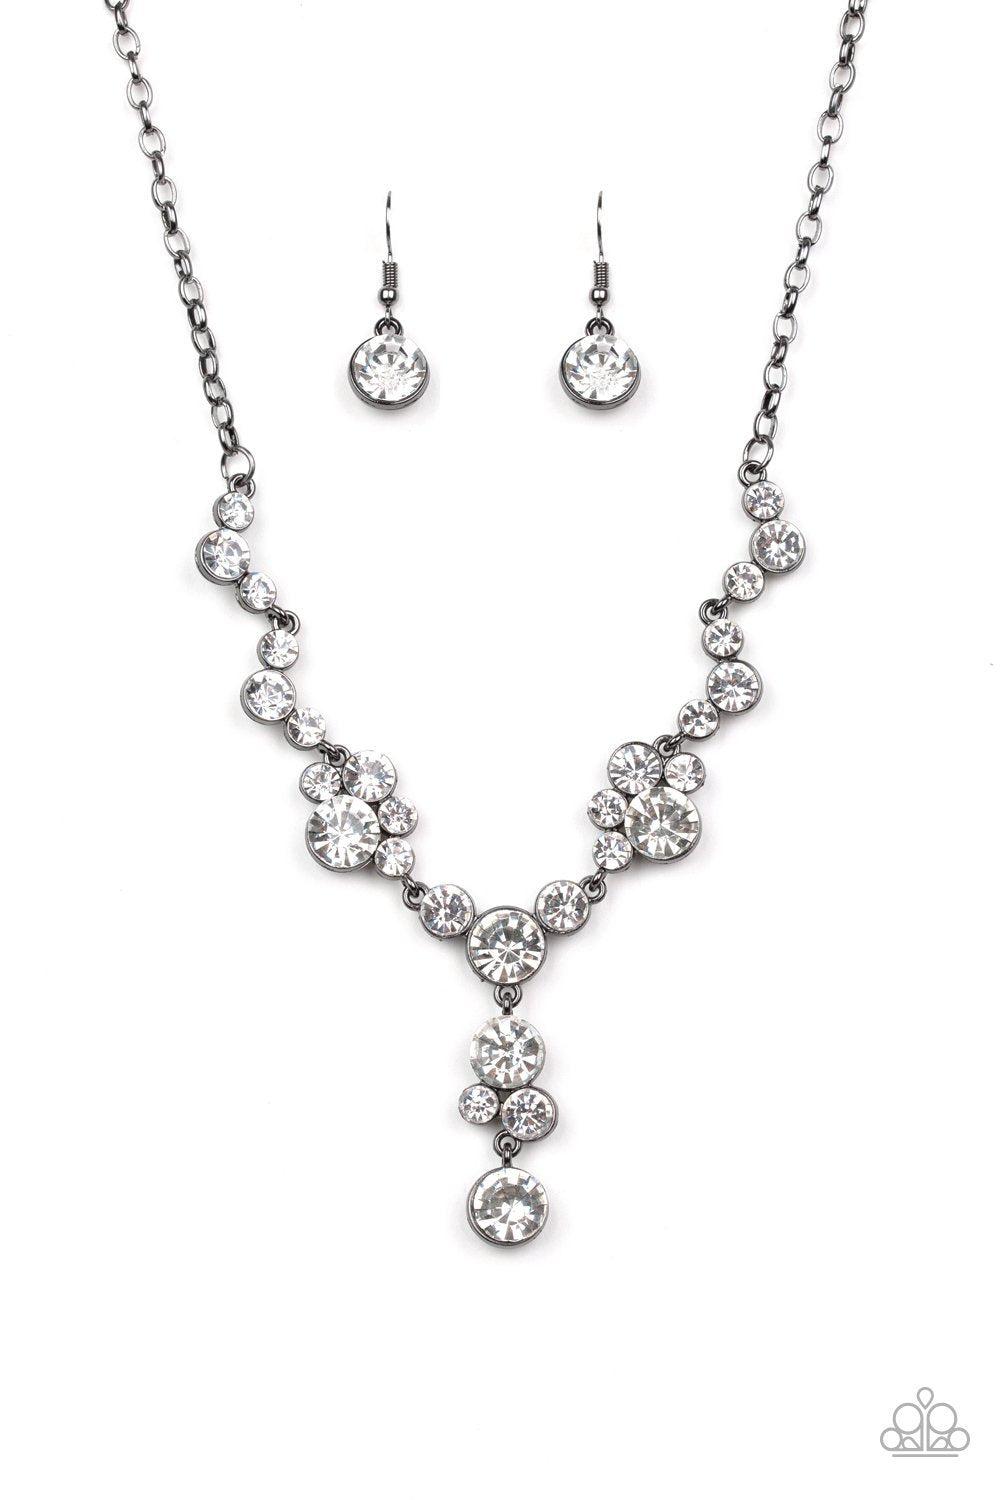 Inner Light Gunmetal Black and White Rhinestone Necklace - Paparazzi Accessories-CarasShop.com - $5 Jewelry by Cara Jewels